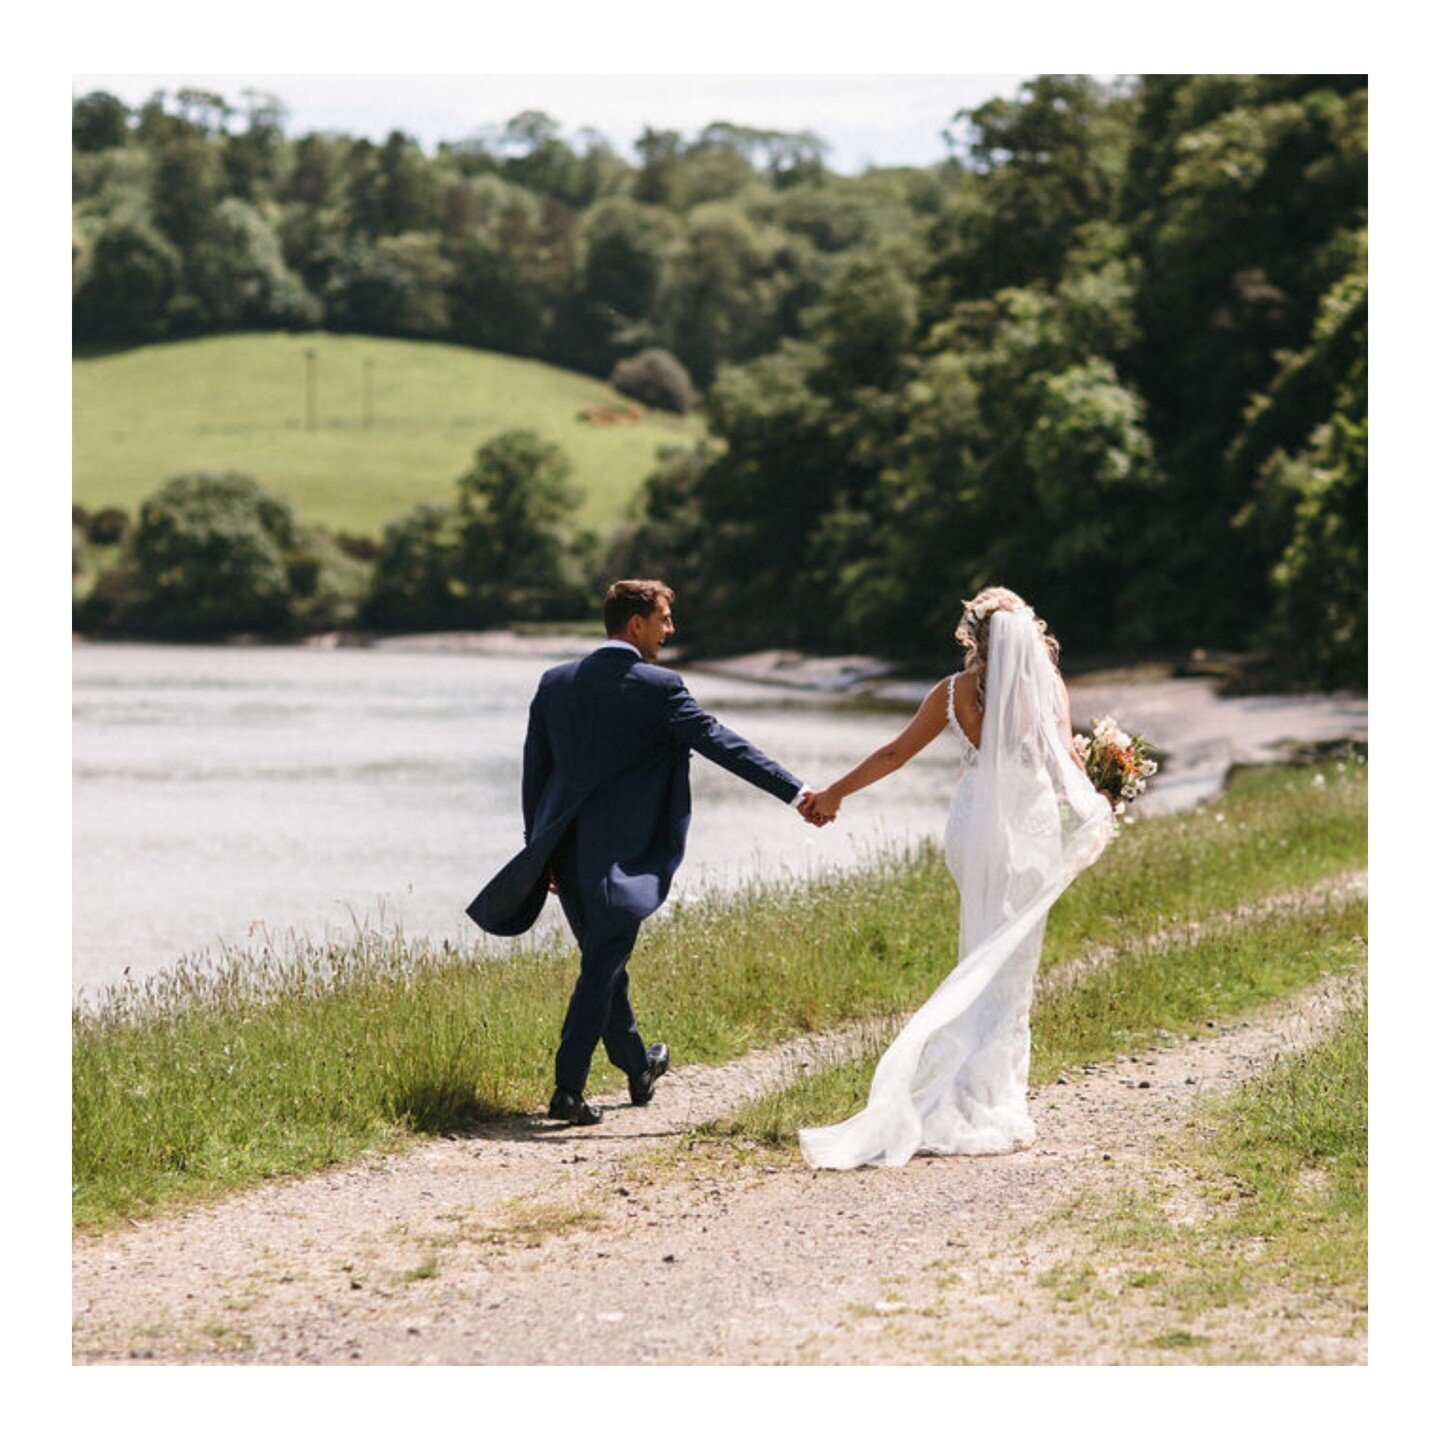 &quot;The high of our journey was the excitement of planning our special day together, and the excitement and enthusiasm from all of our suppliers made it such a joy to work with them and help us bring our vision to life for our dream wedding...

...